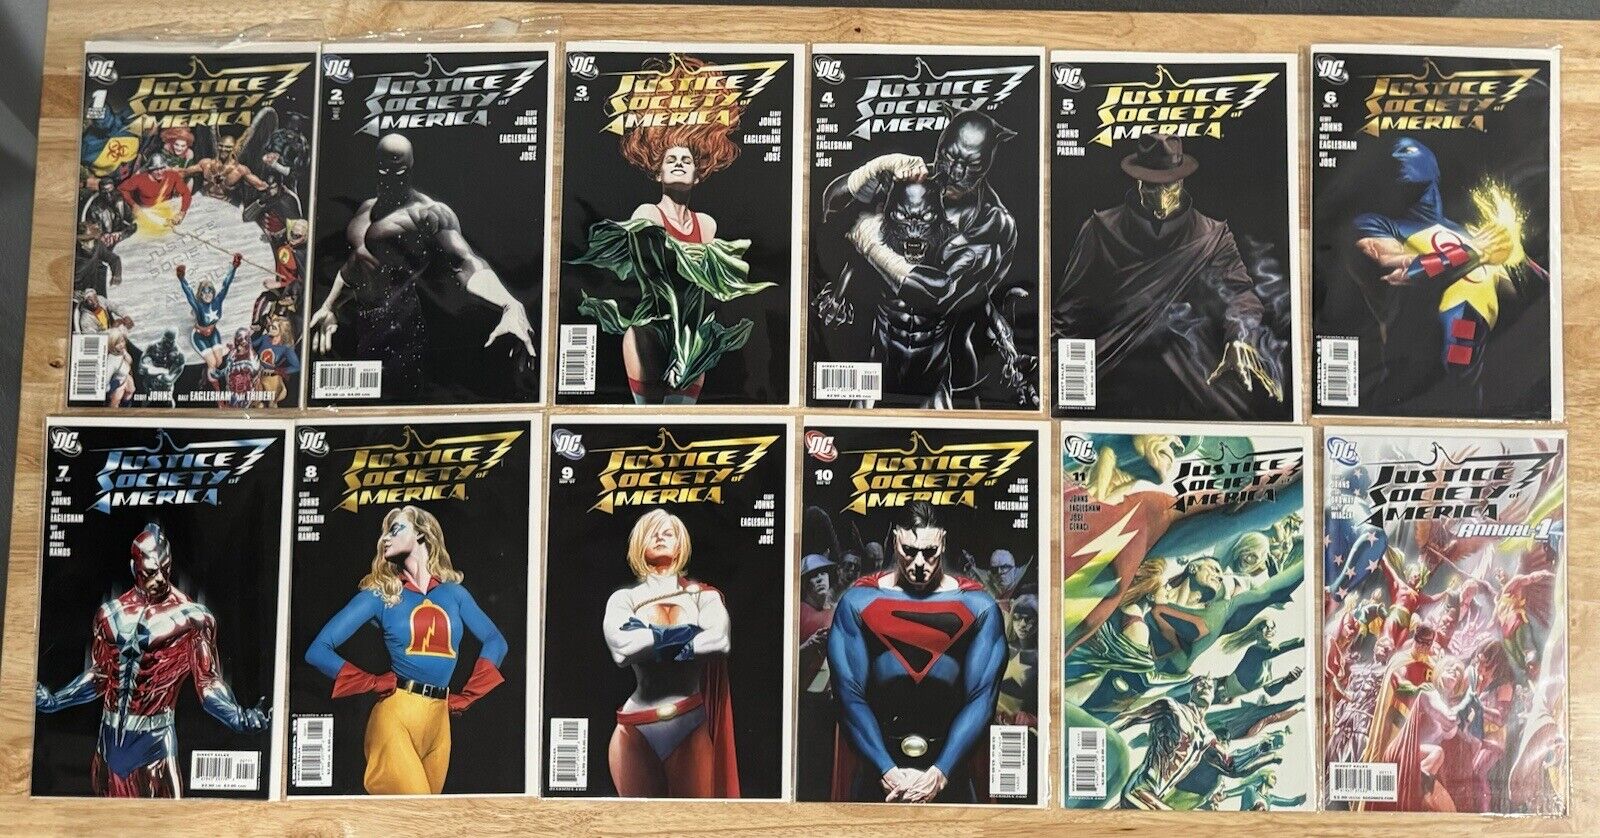 Justice Society of America #1-11 + Annual #1 Geoff Johns- Alex Ross - VF